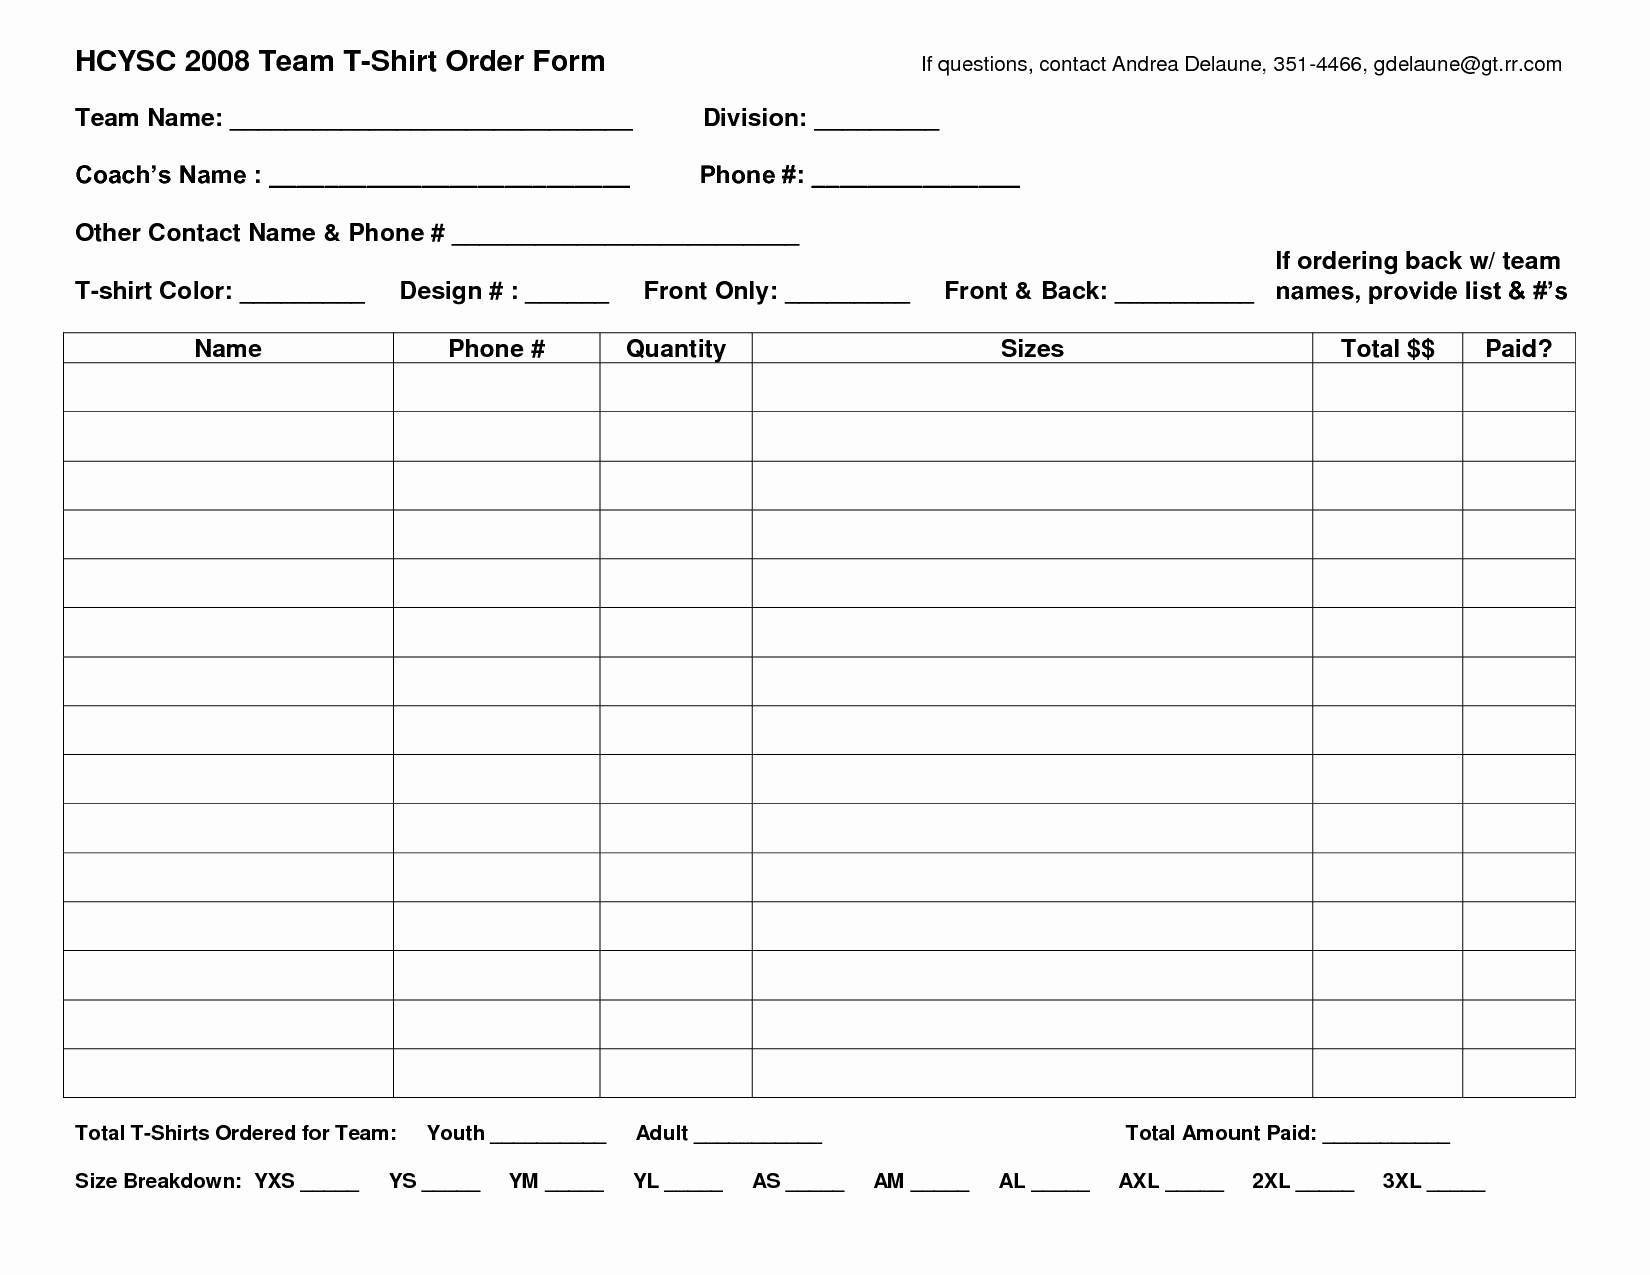 Sales order form Template Free New T Shirt order form Template